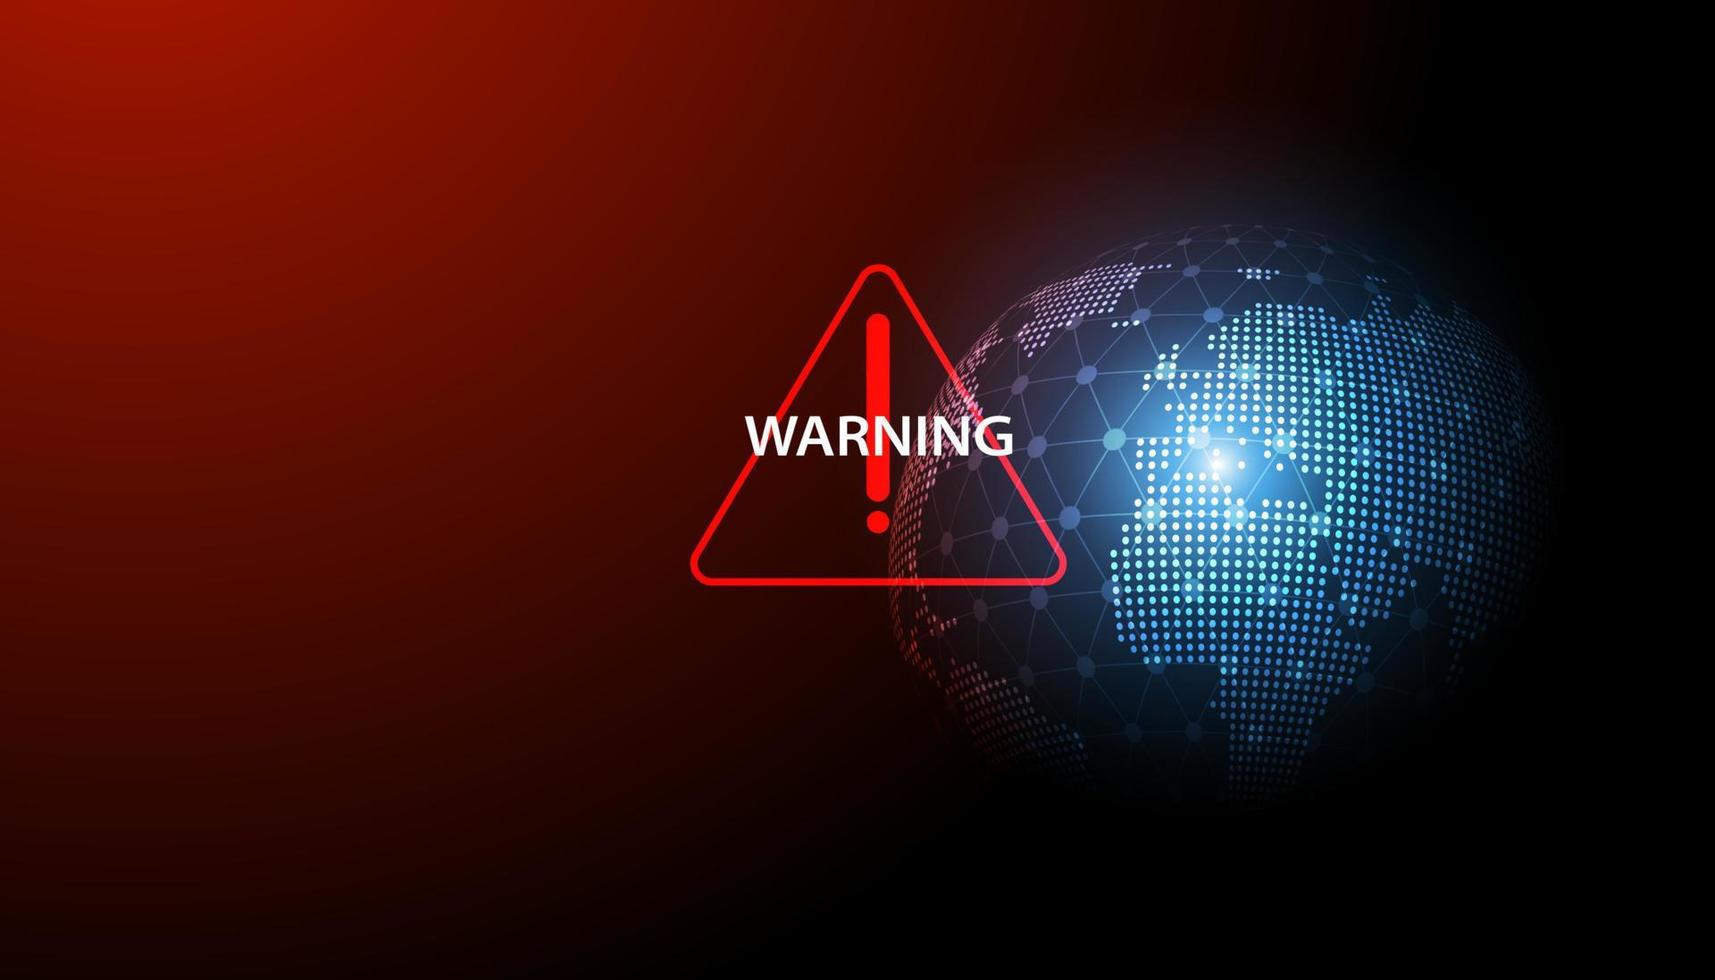 Abstract red warning symbol on world map background for warning disaster or cyber defense threat global warming crisis or war vector